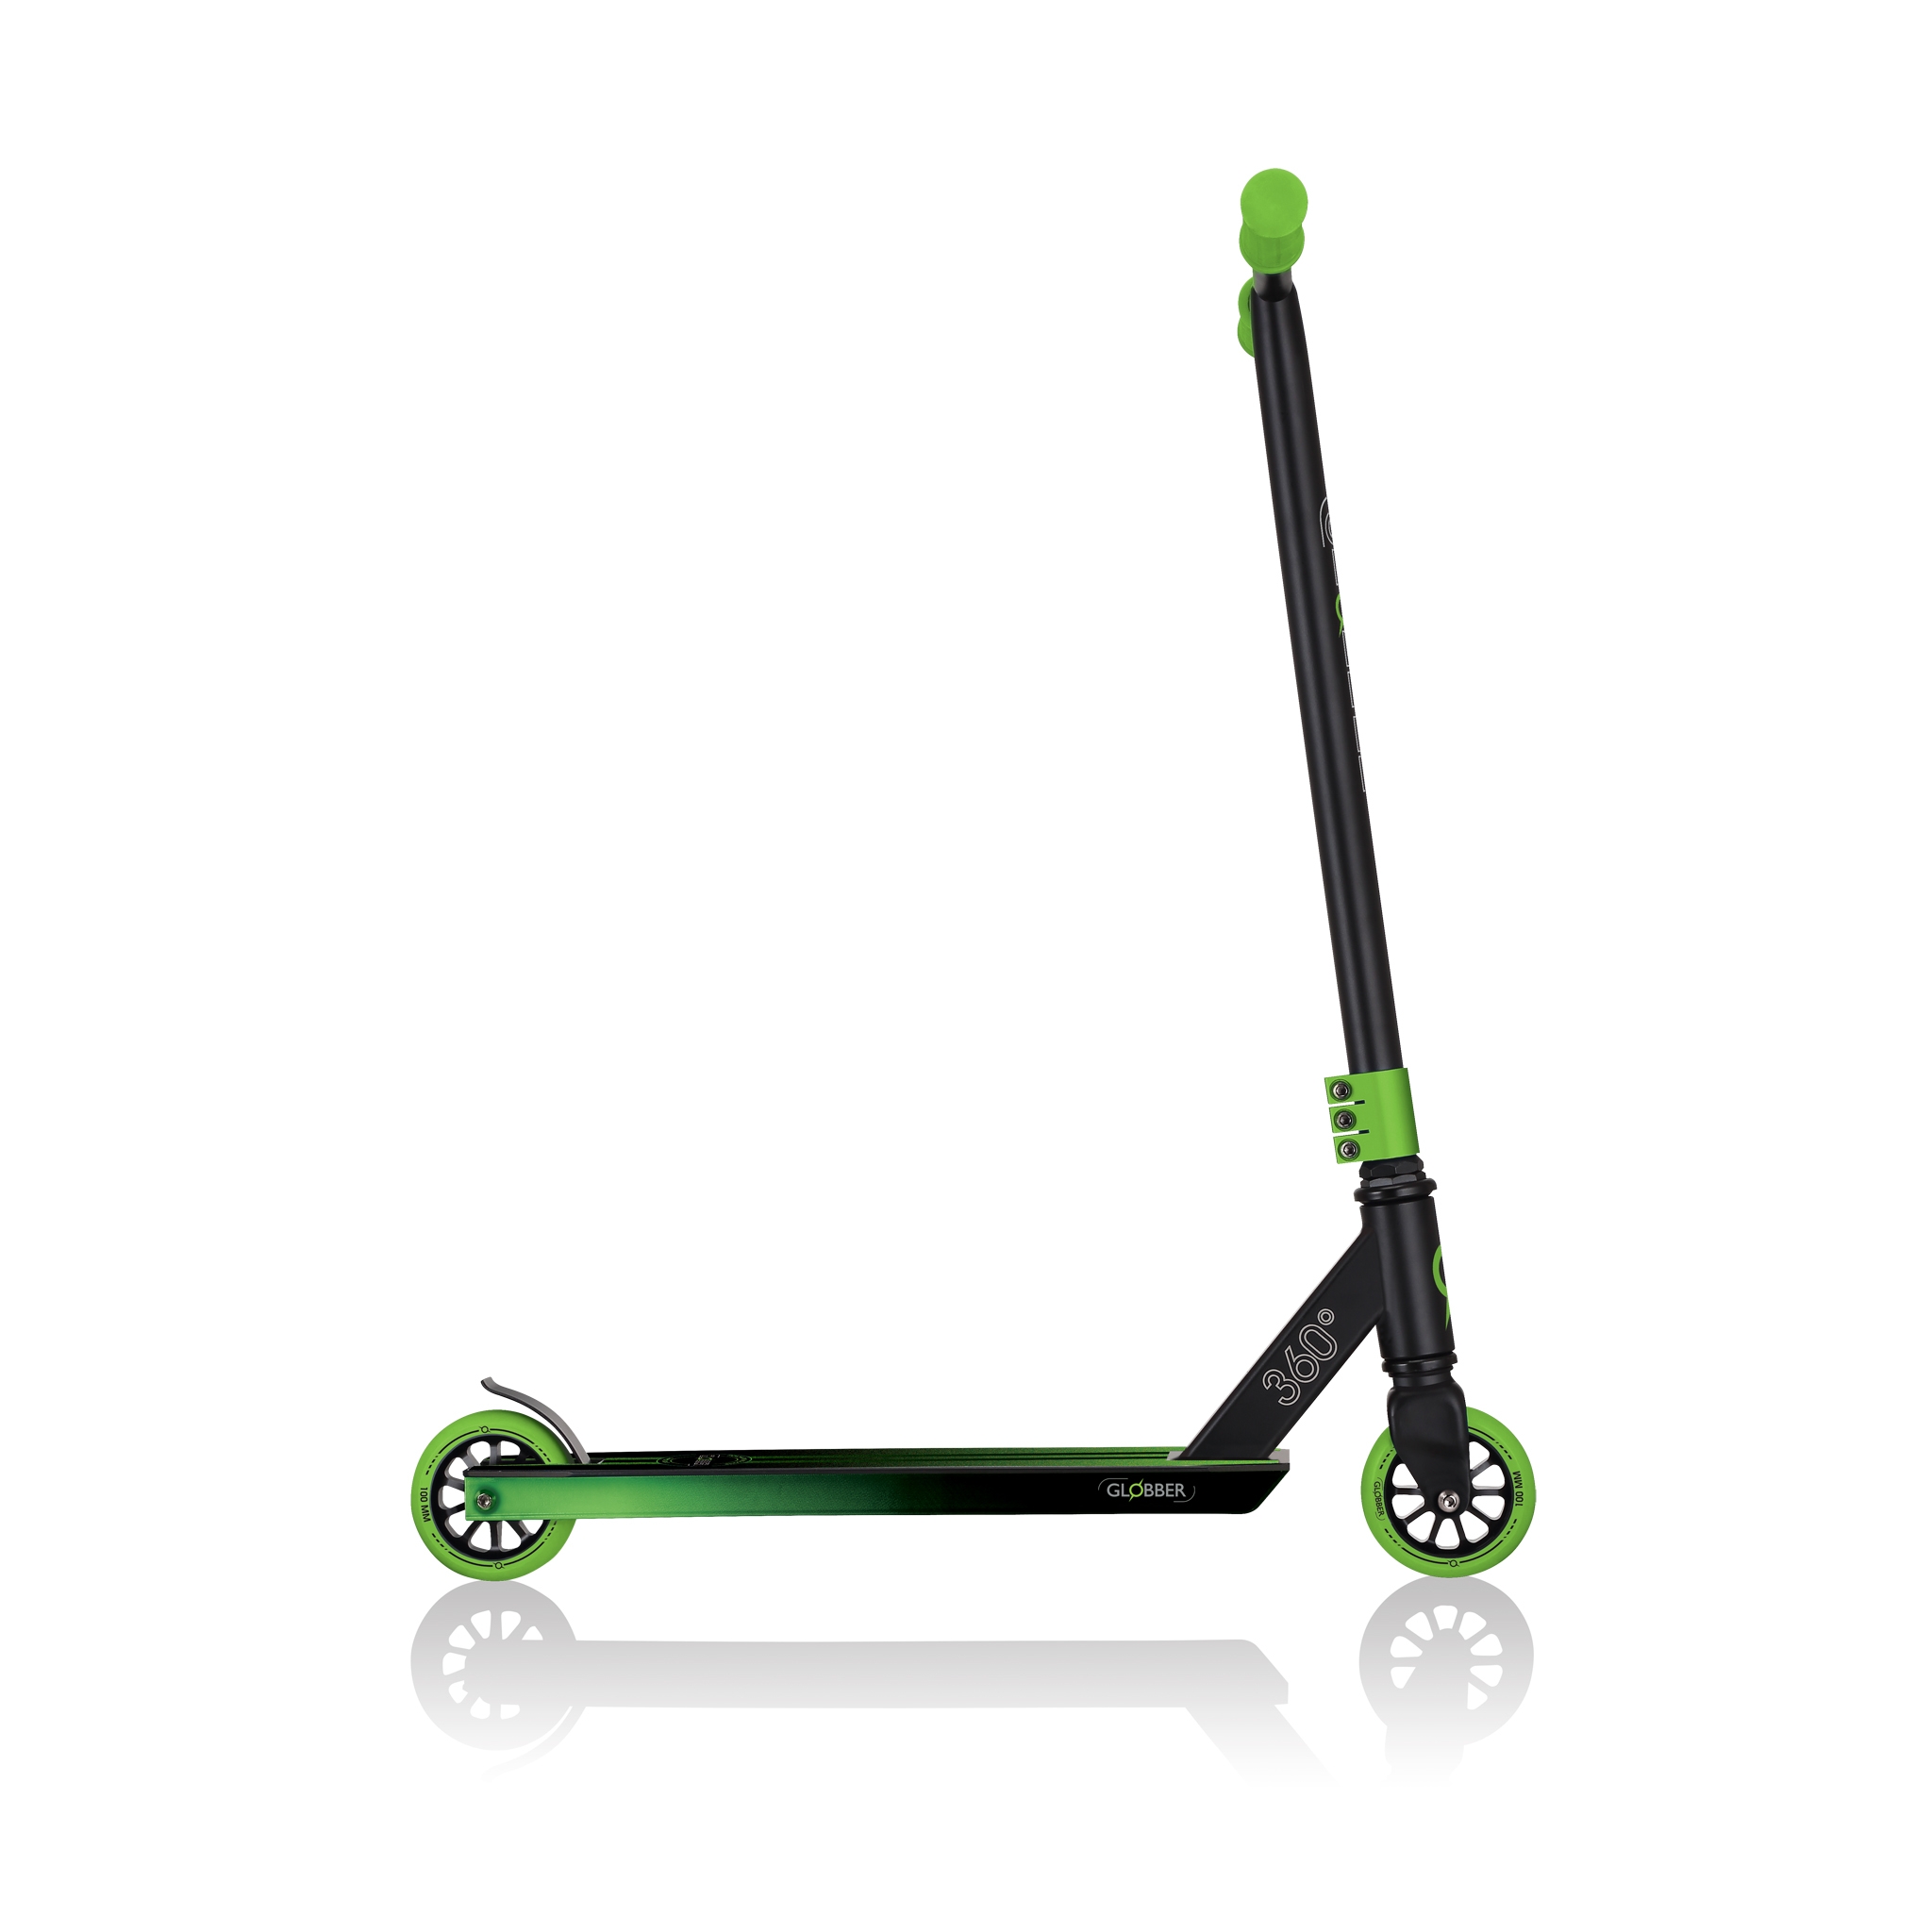 stunt-scooter-with-high-quality-wheels-Globber-GS360 5